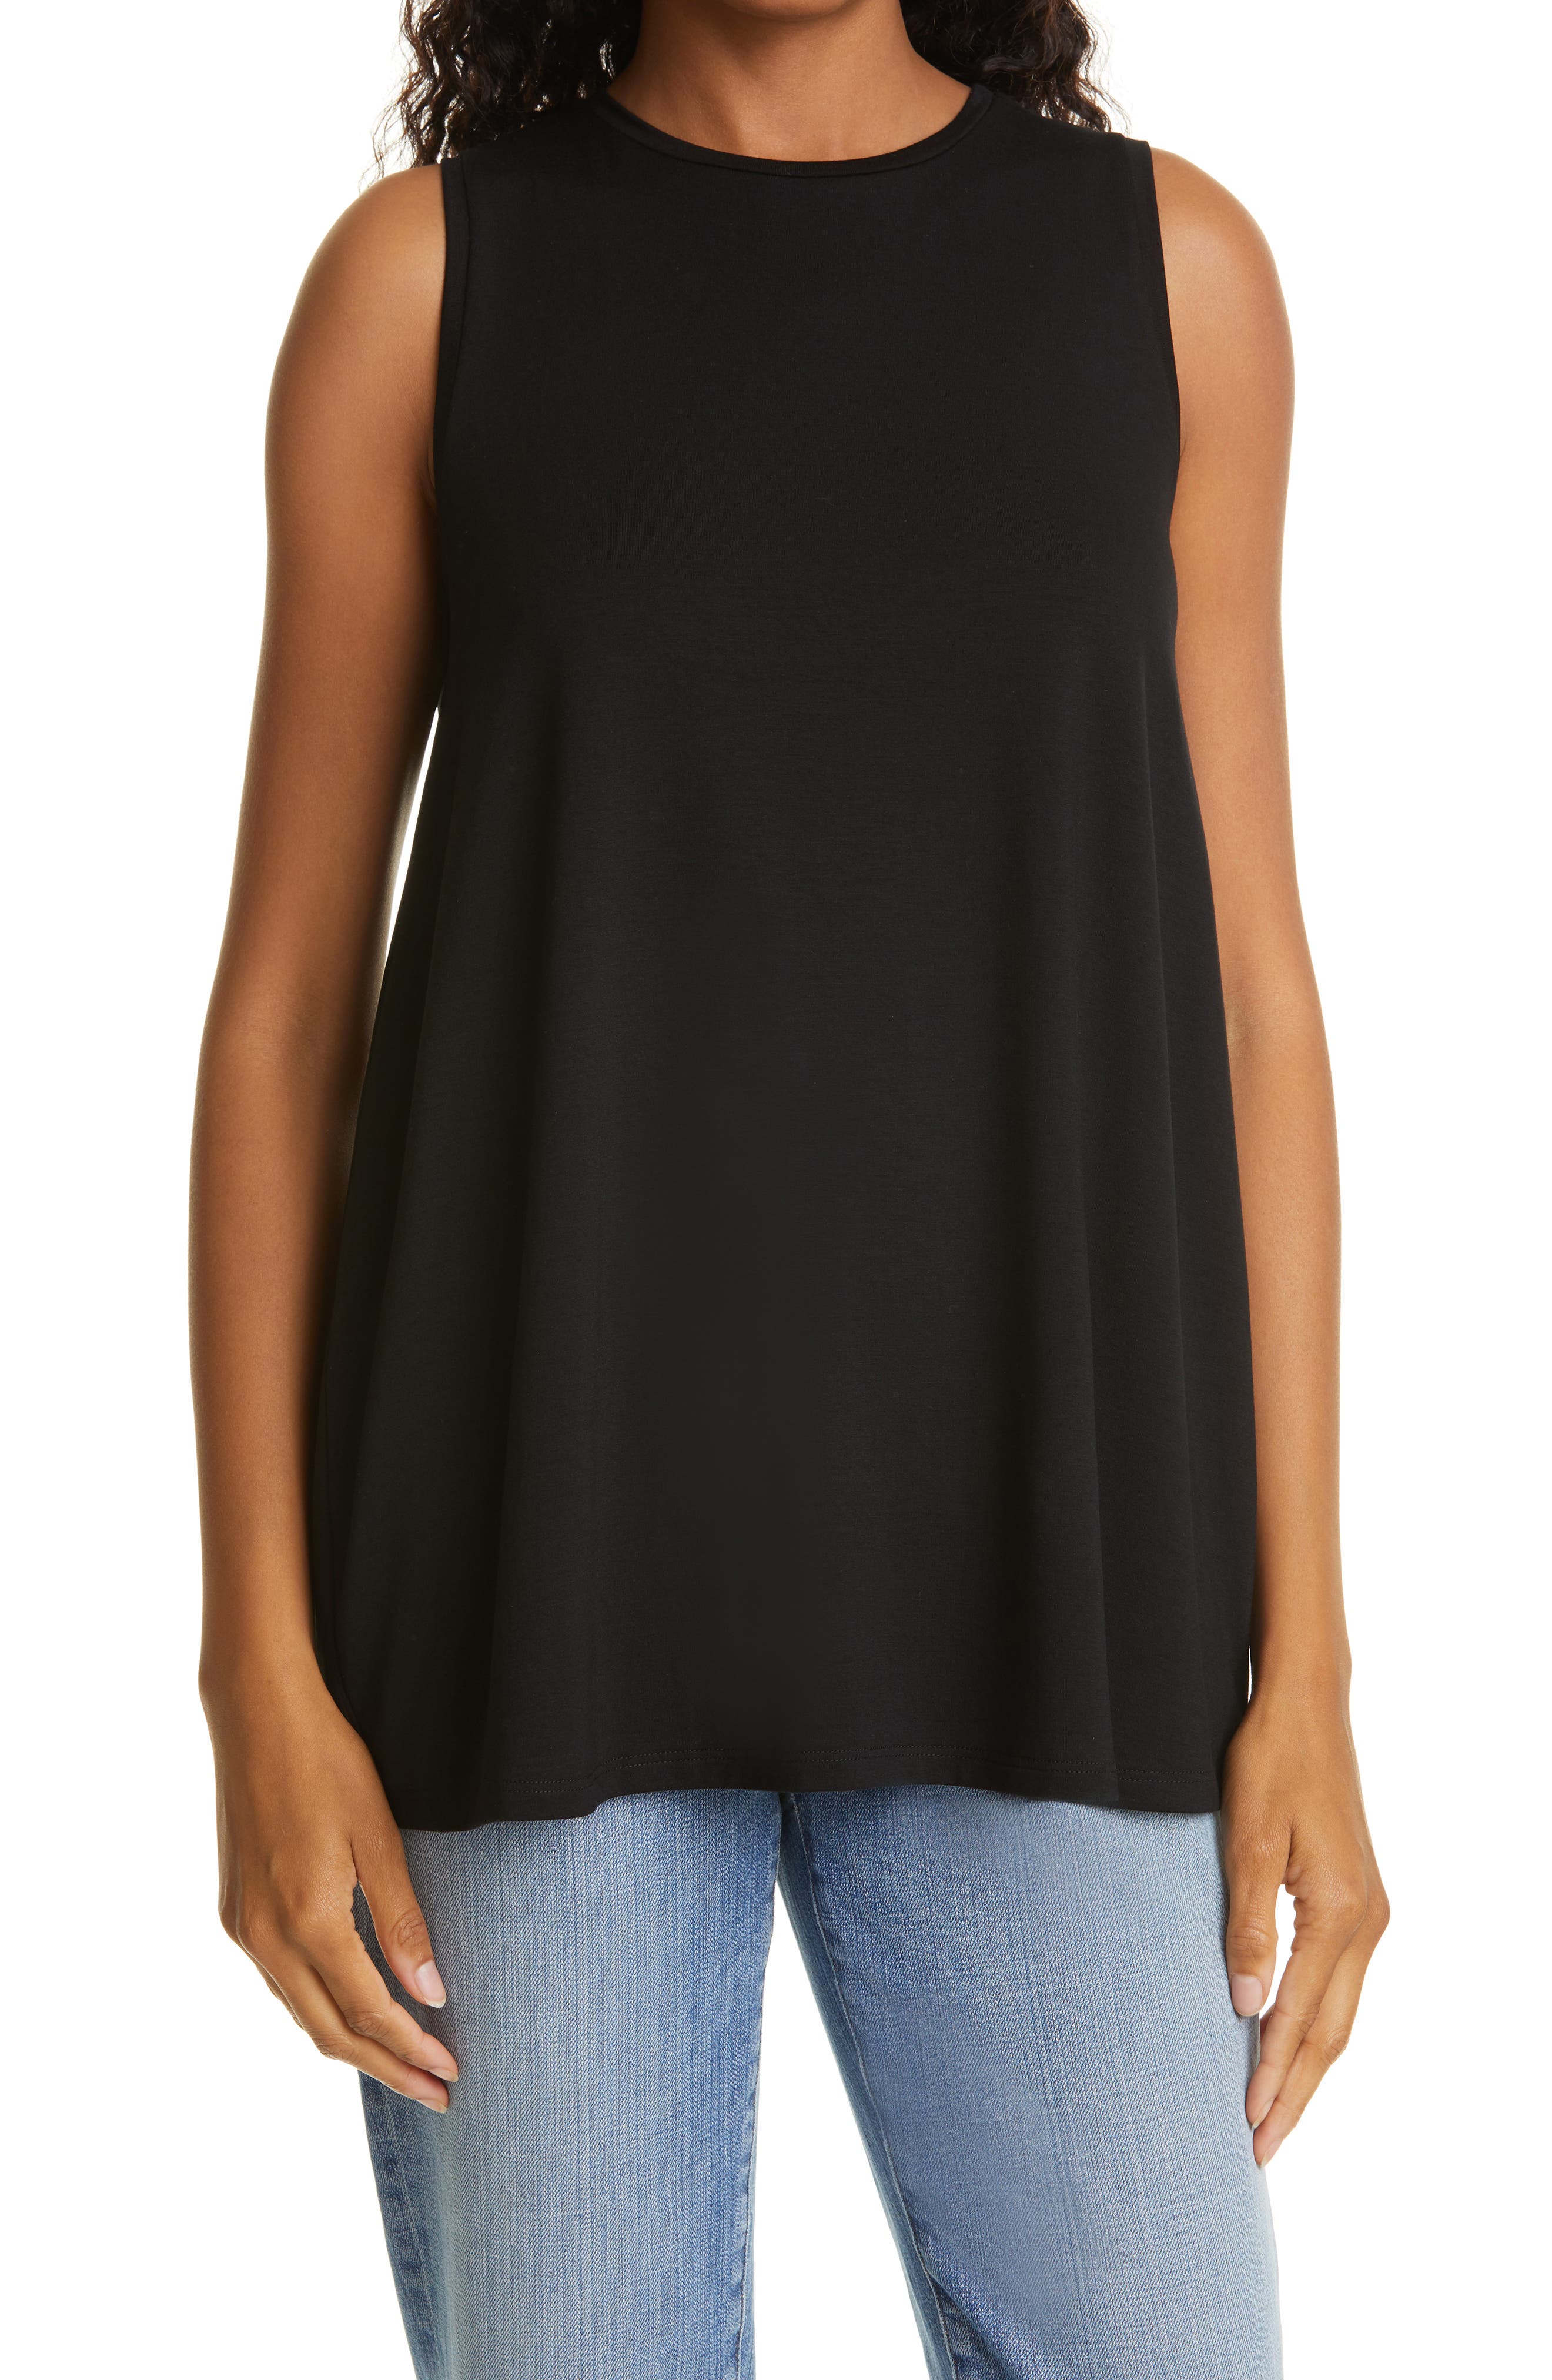 Women/'s organic top with a decorative cut Sleeveless blouse women Black cotton quilted top women